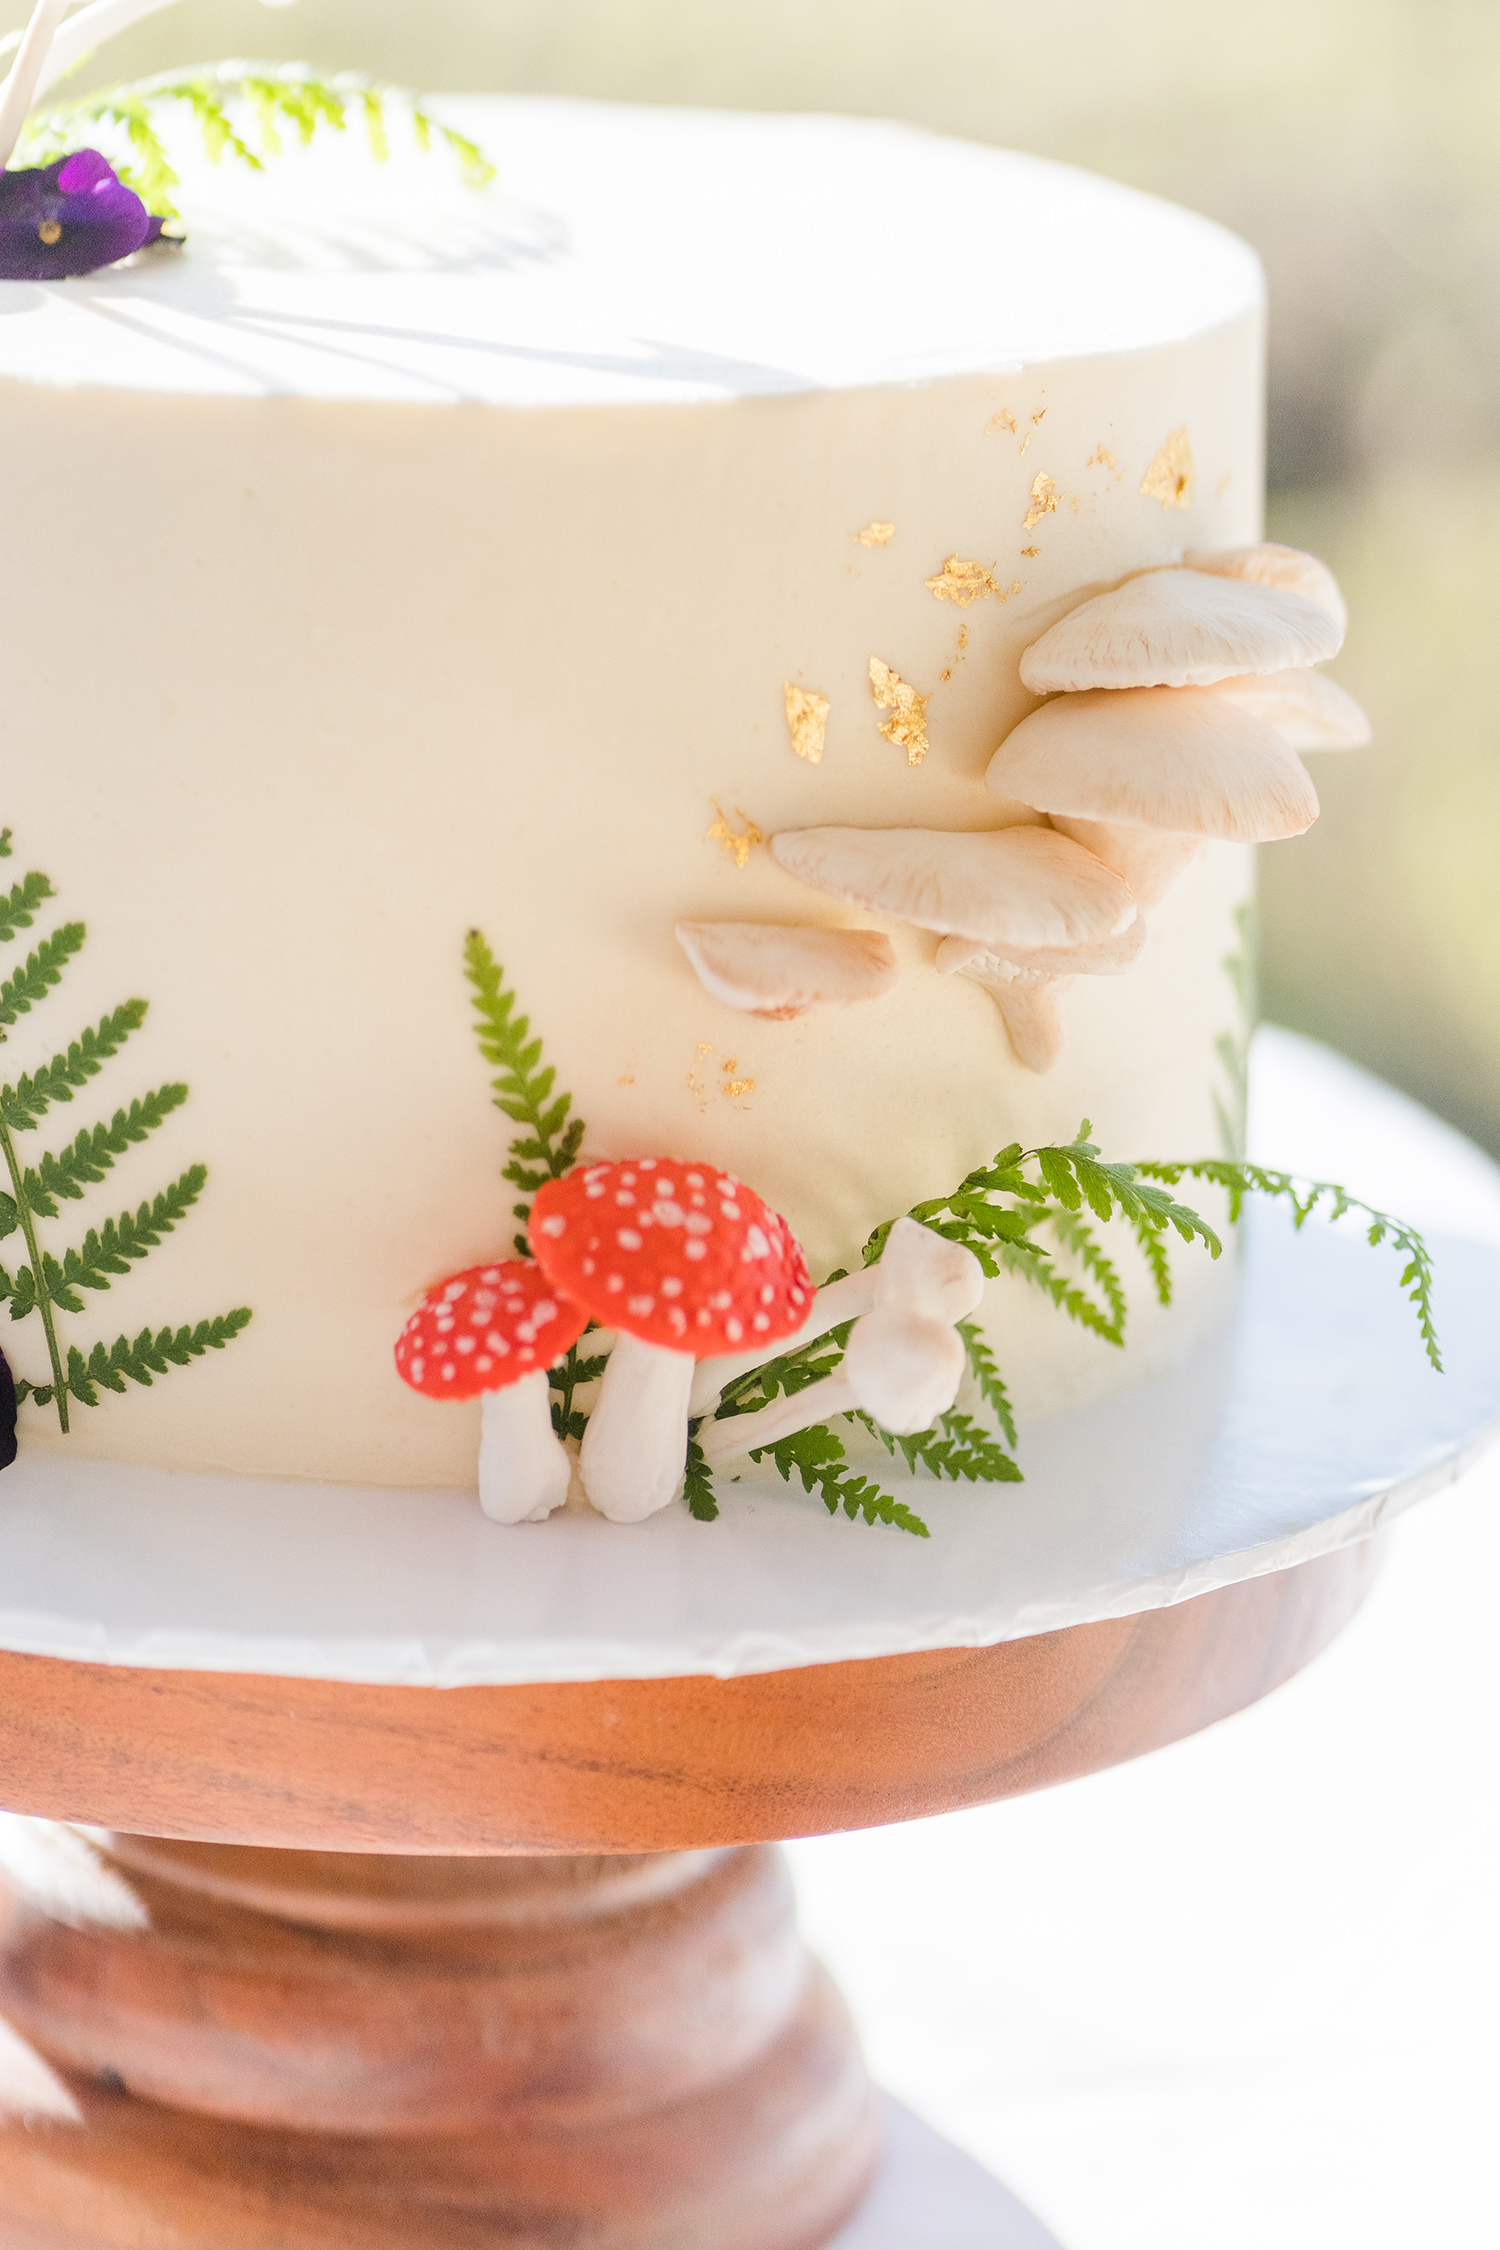 the mushroom themed wedding cake at a private estate wedding in northern california by adrienne and dani photography